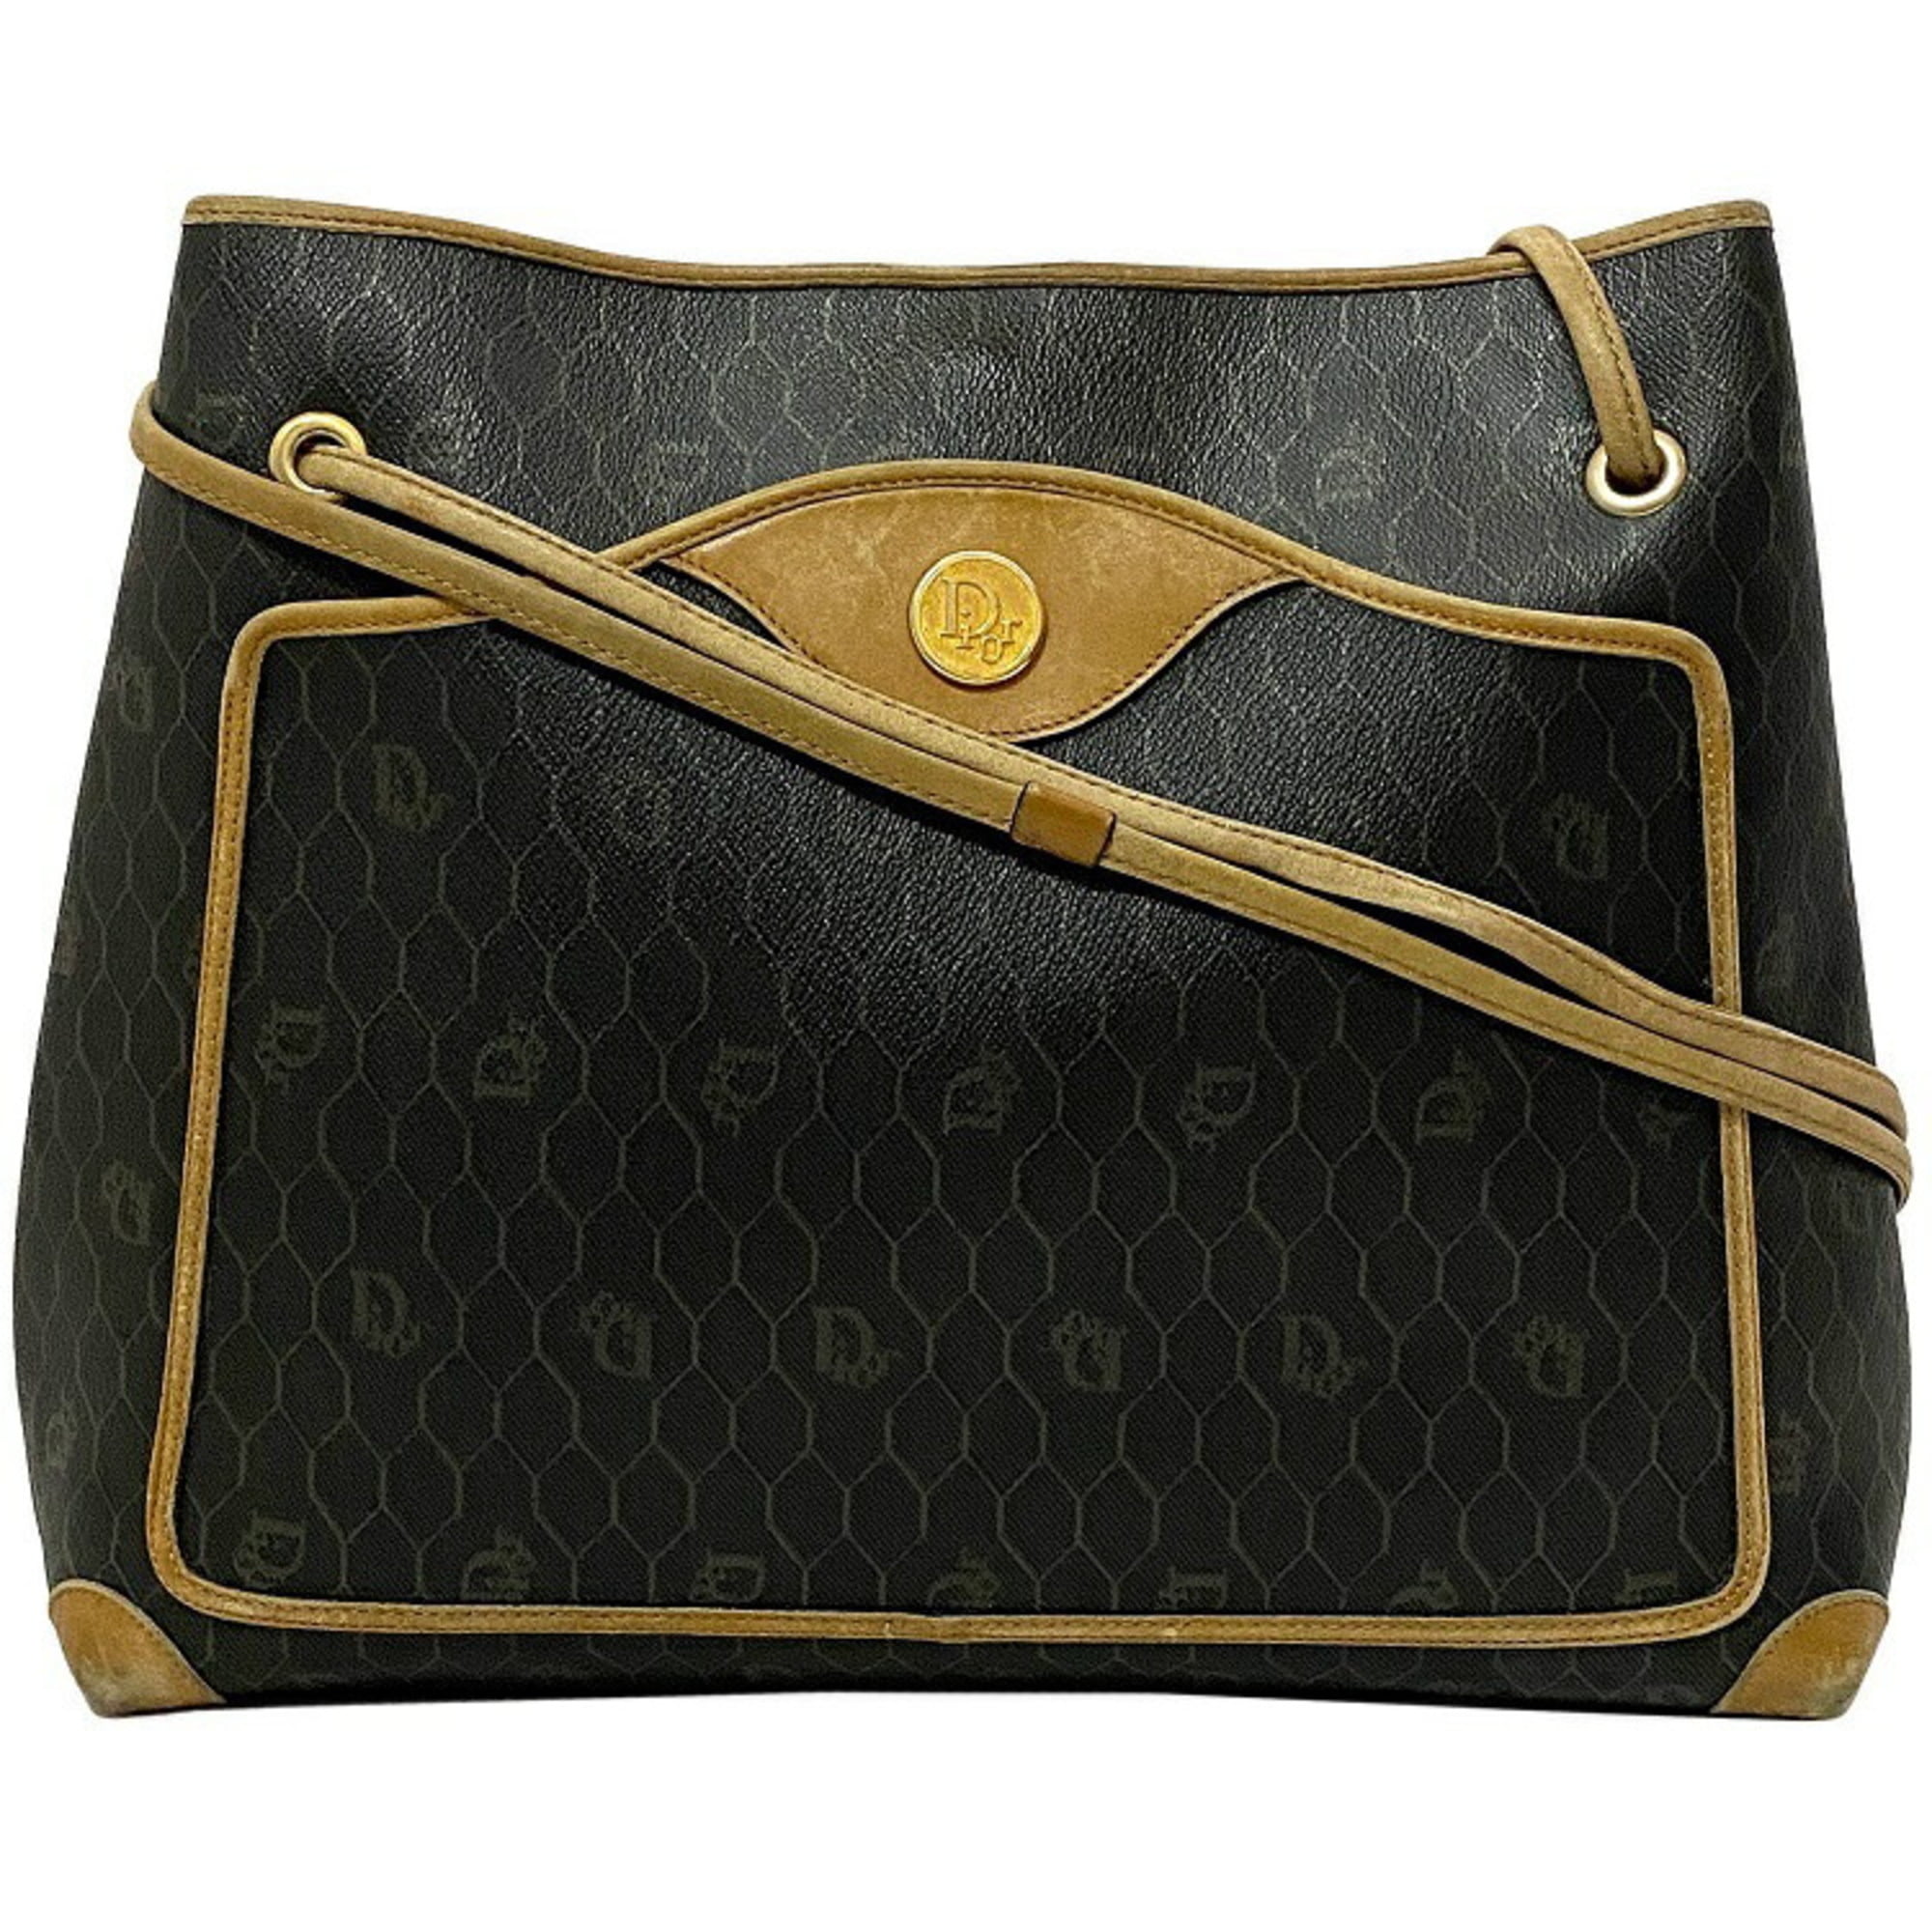 Dior Authenticated Leather Purse